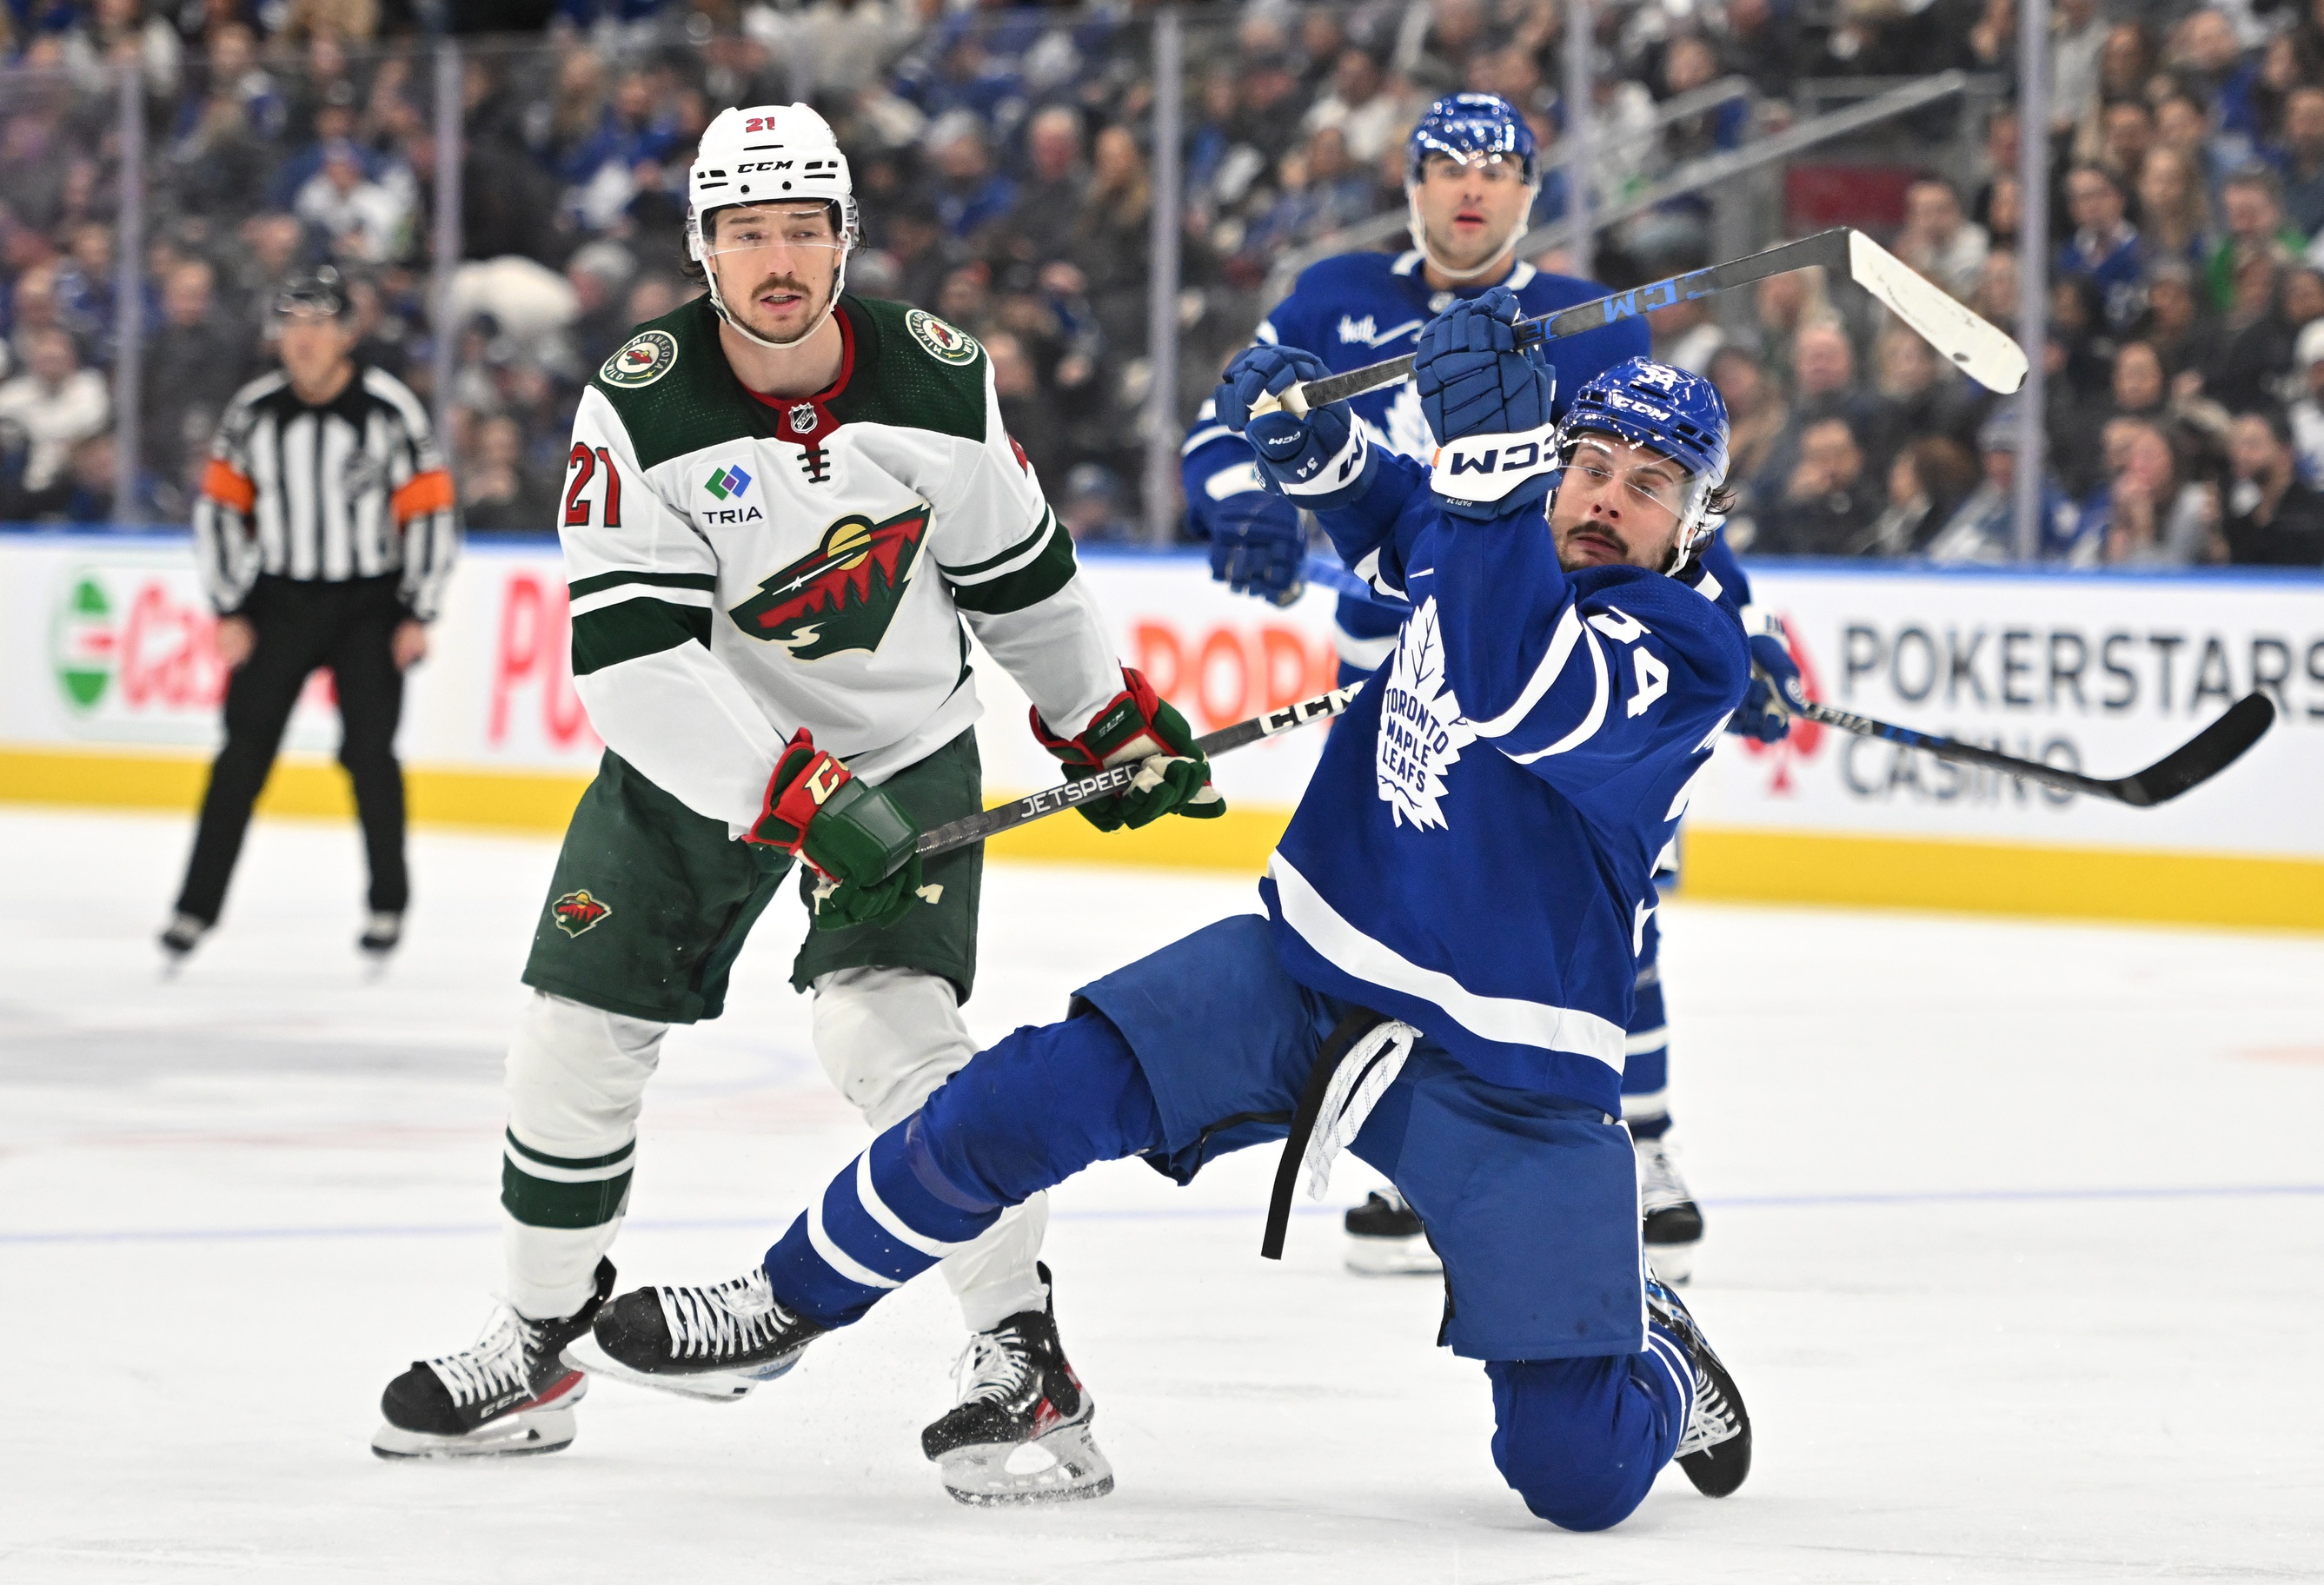 Ex-Golden Gophers go for it as Leafs take on Wild Saturday